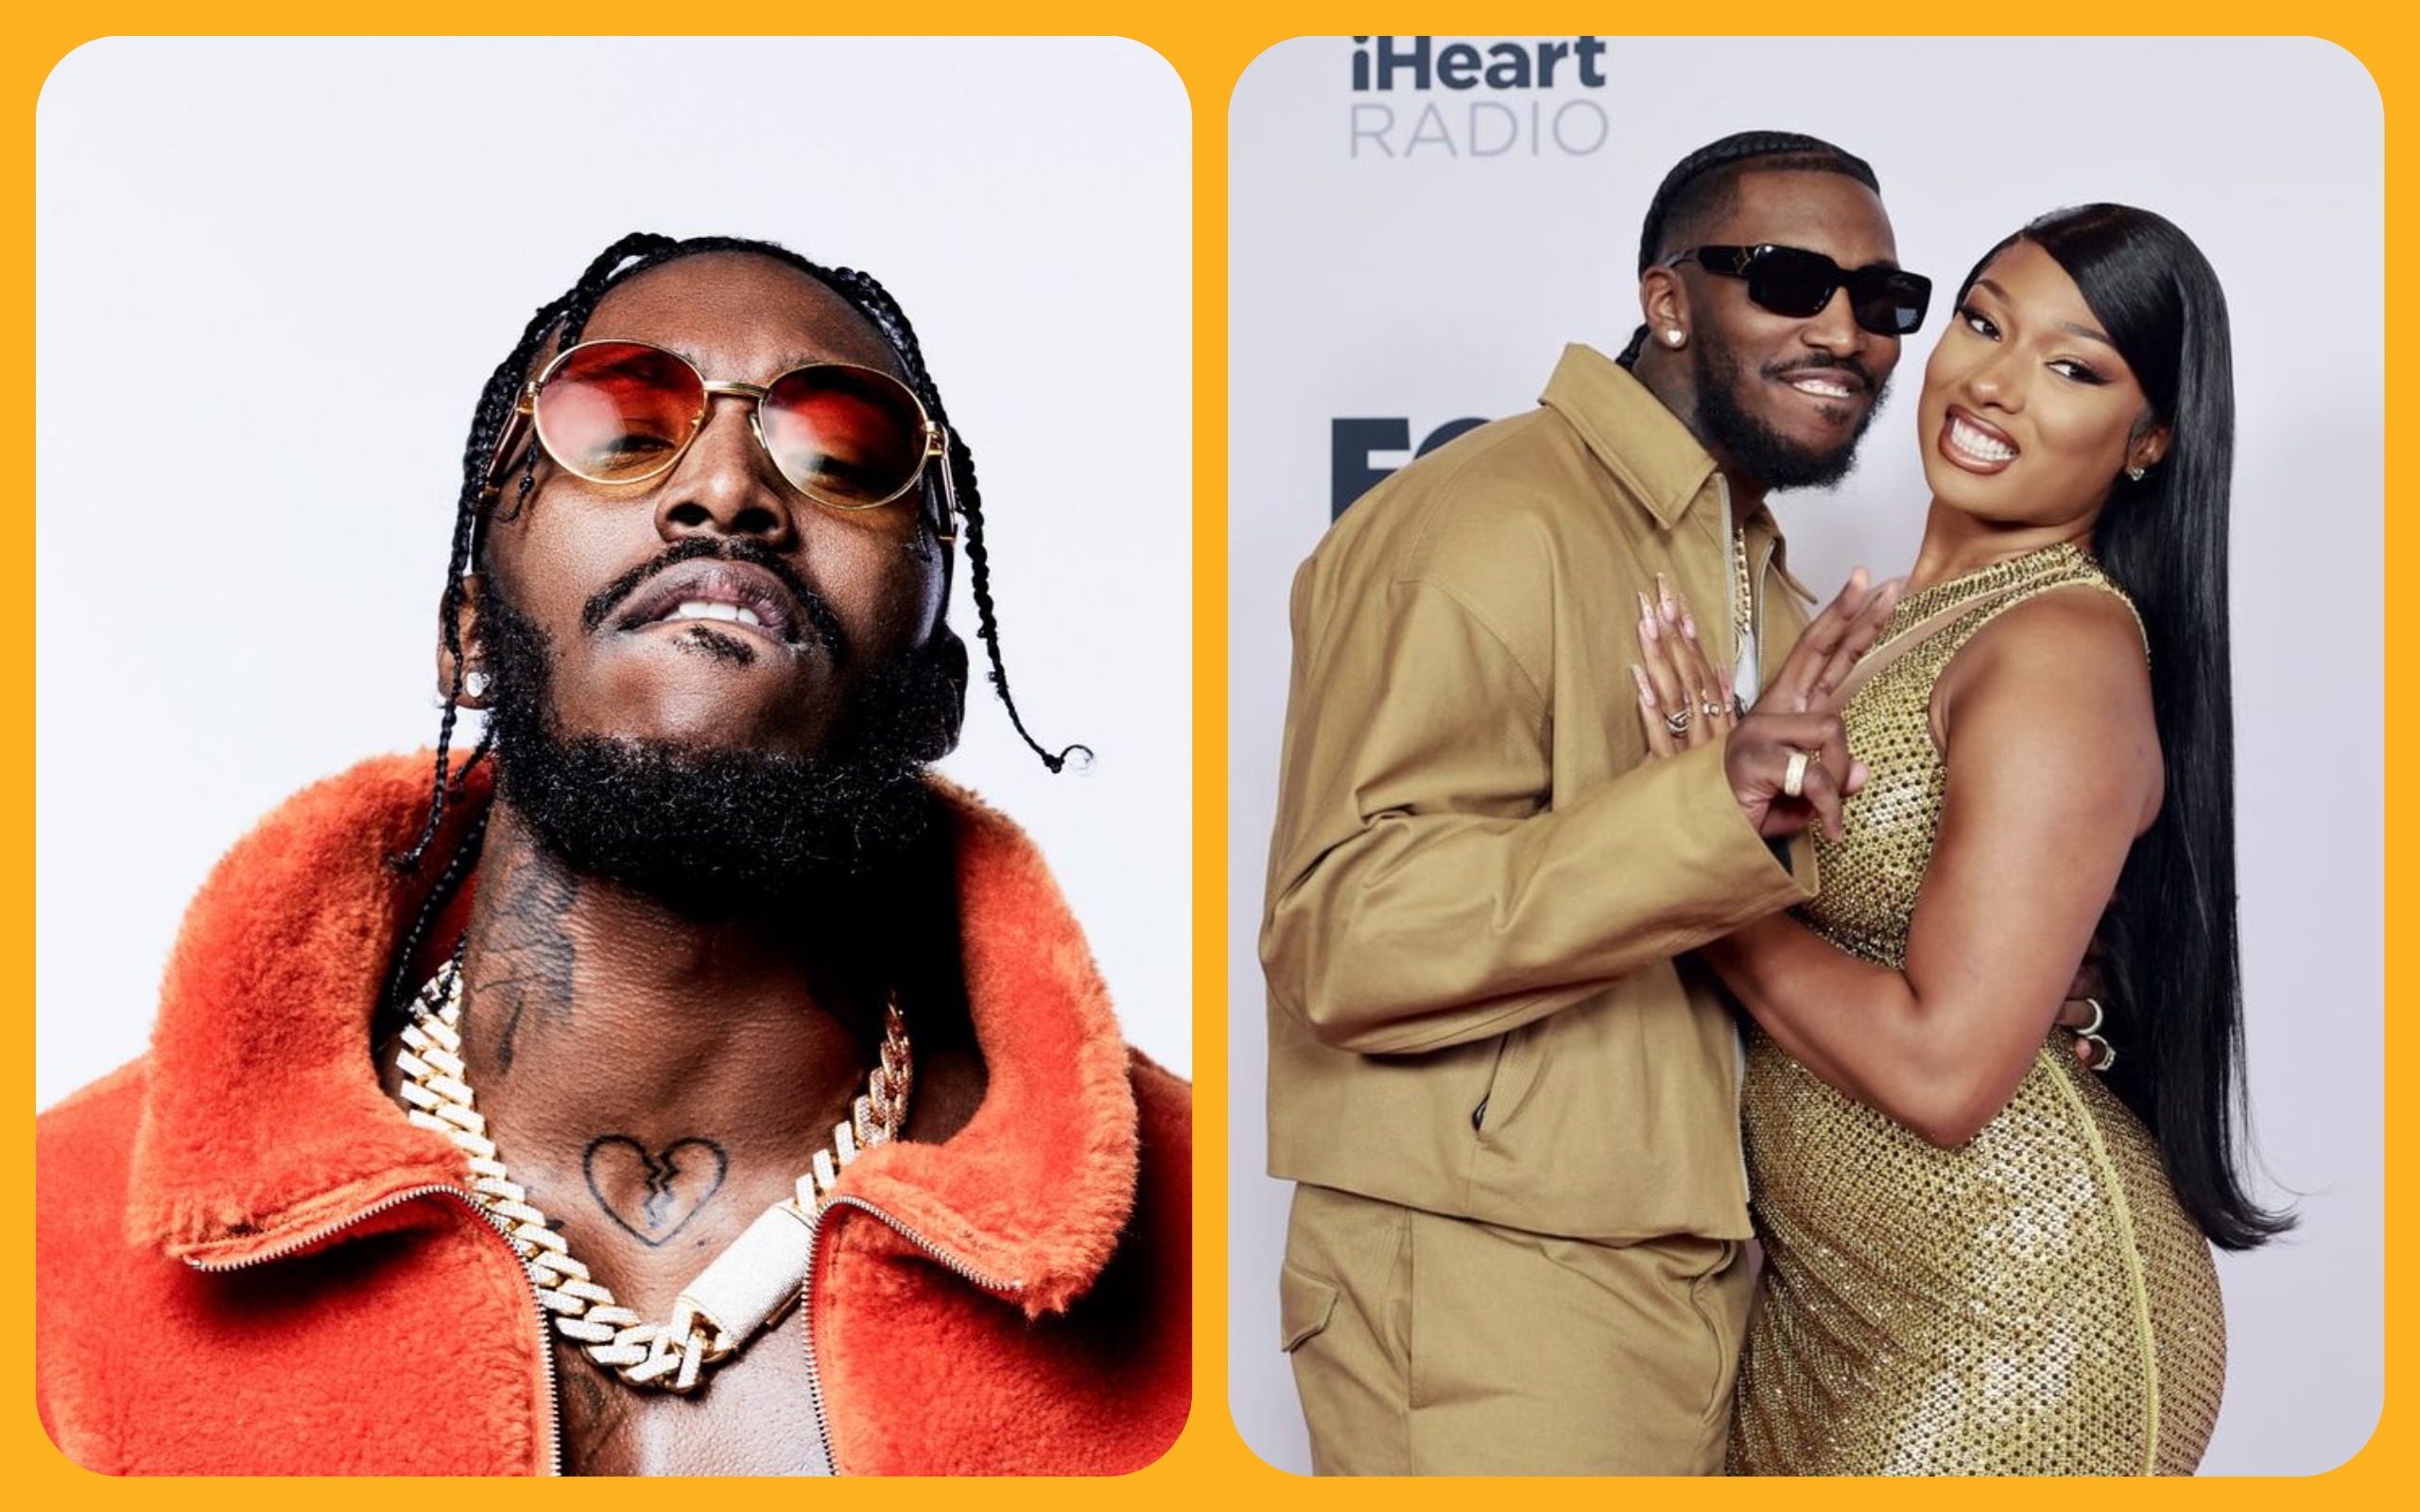 Pardison Fontaine Accuses Megan Thee Stallion of Cheating on New Song "Thee Person"